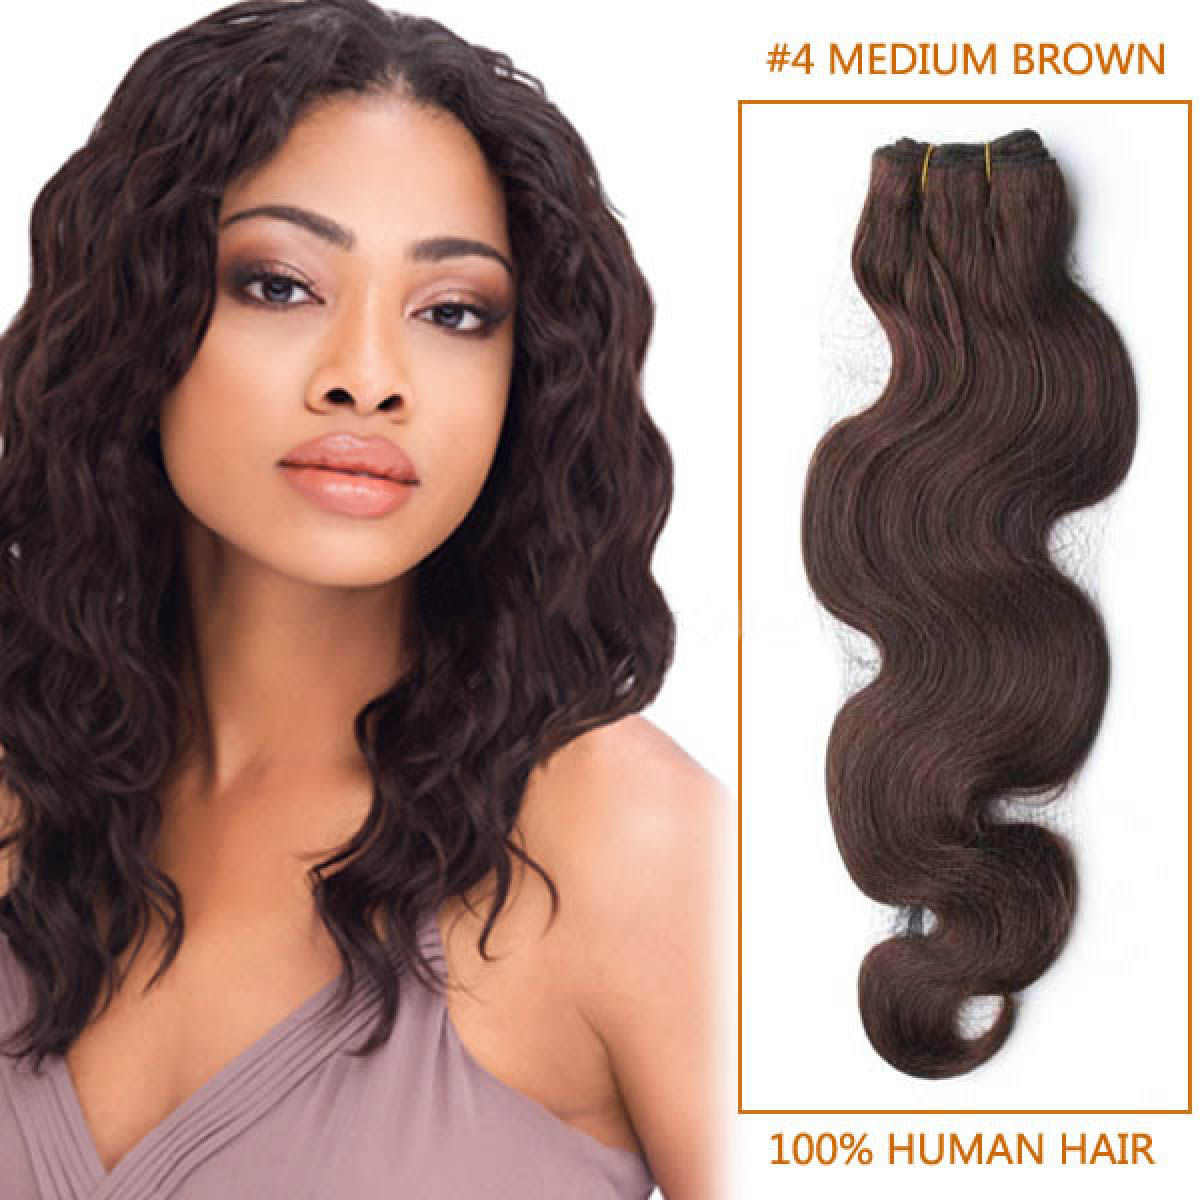 Inch 4 Medium Brown Body Wave Indian Remy Hair Wefts